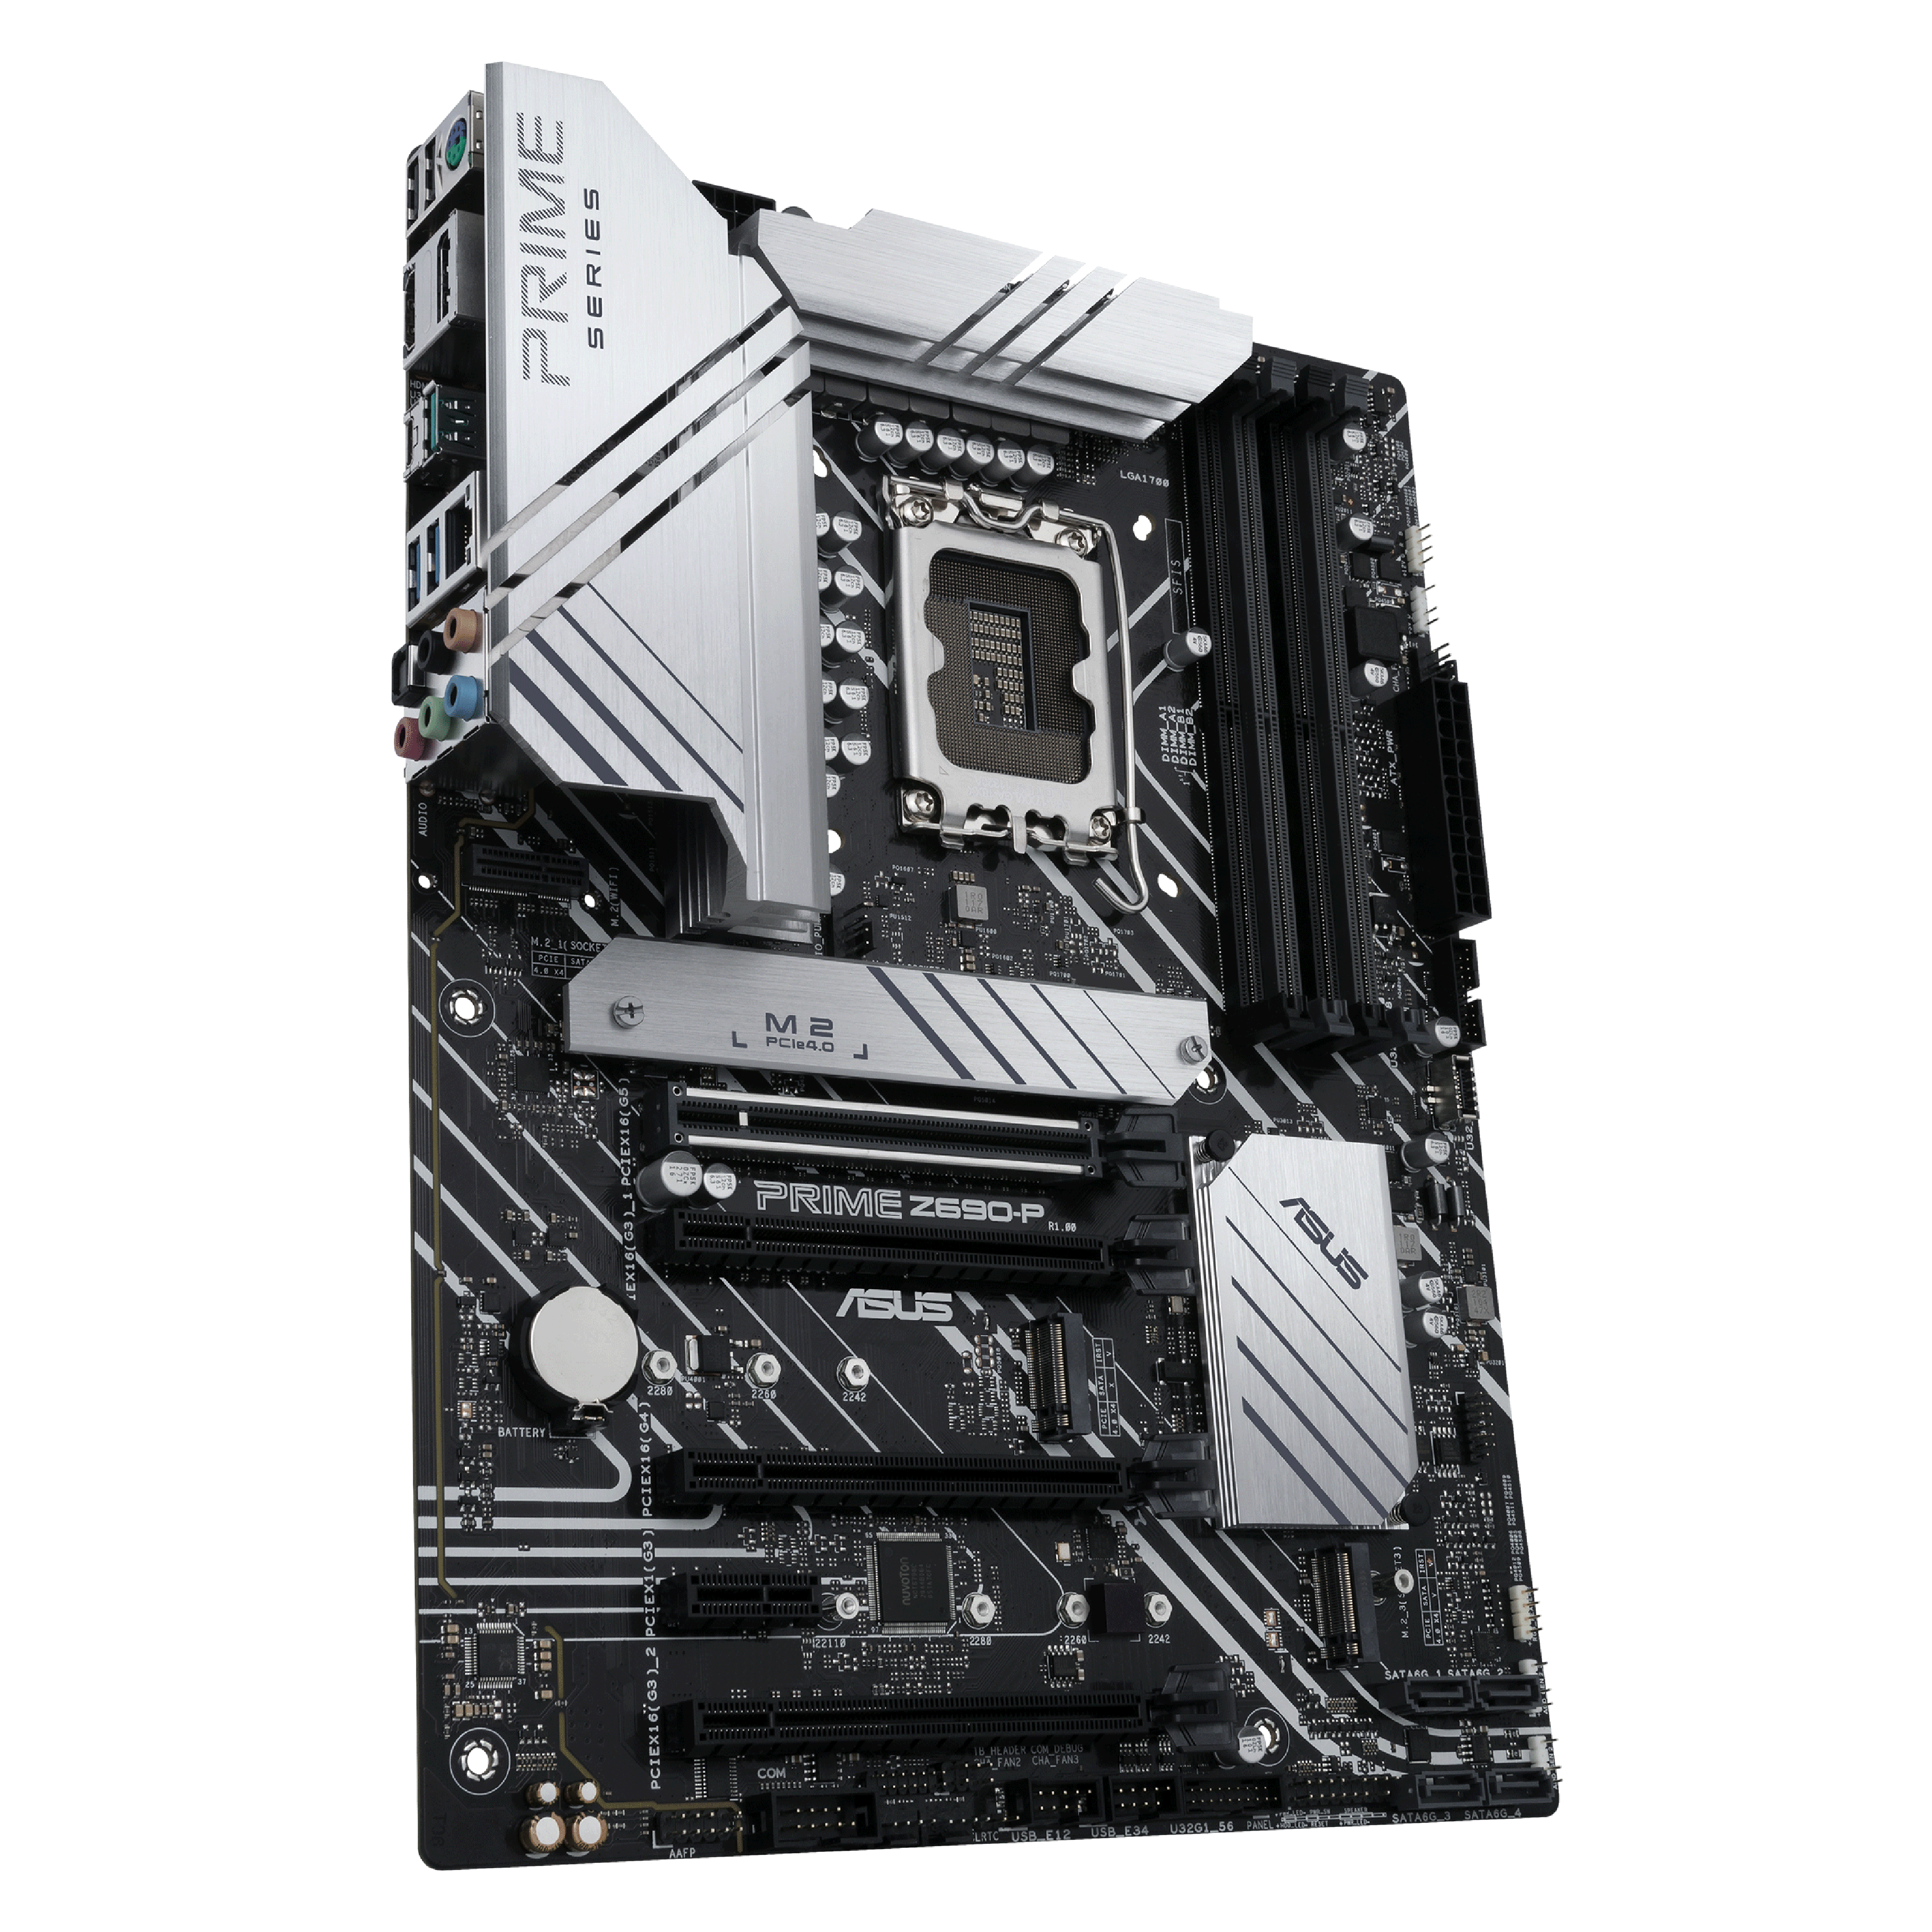 Prime motherboard product image​